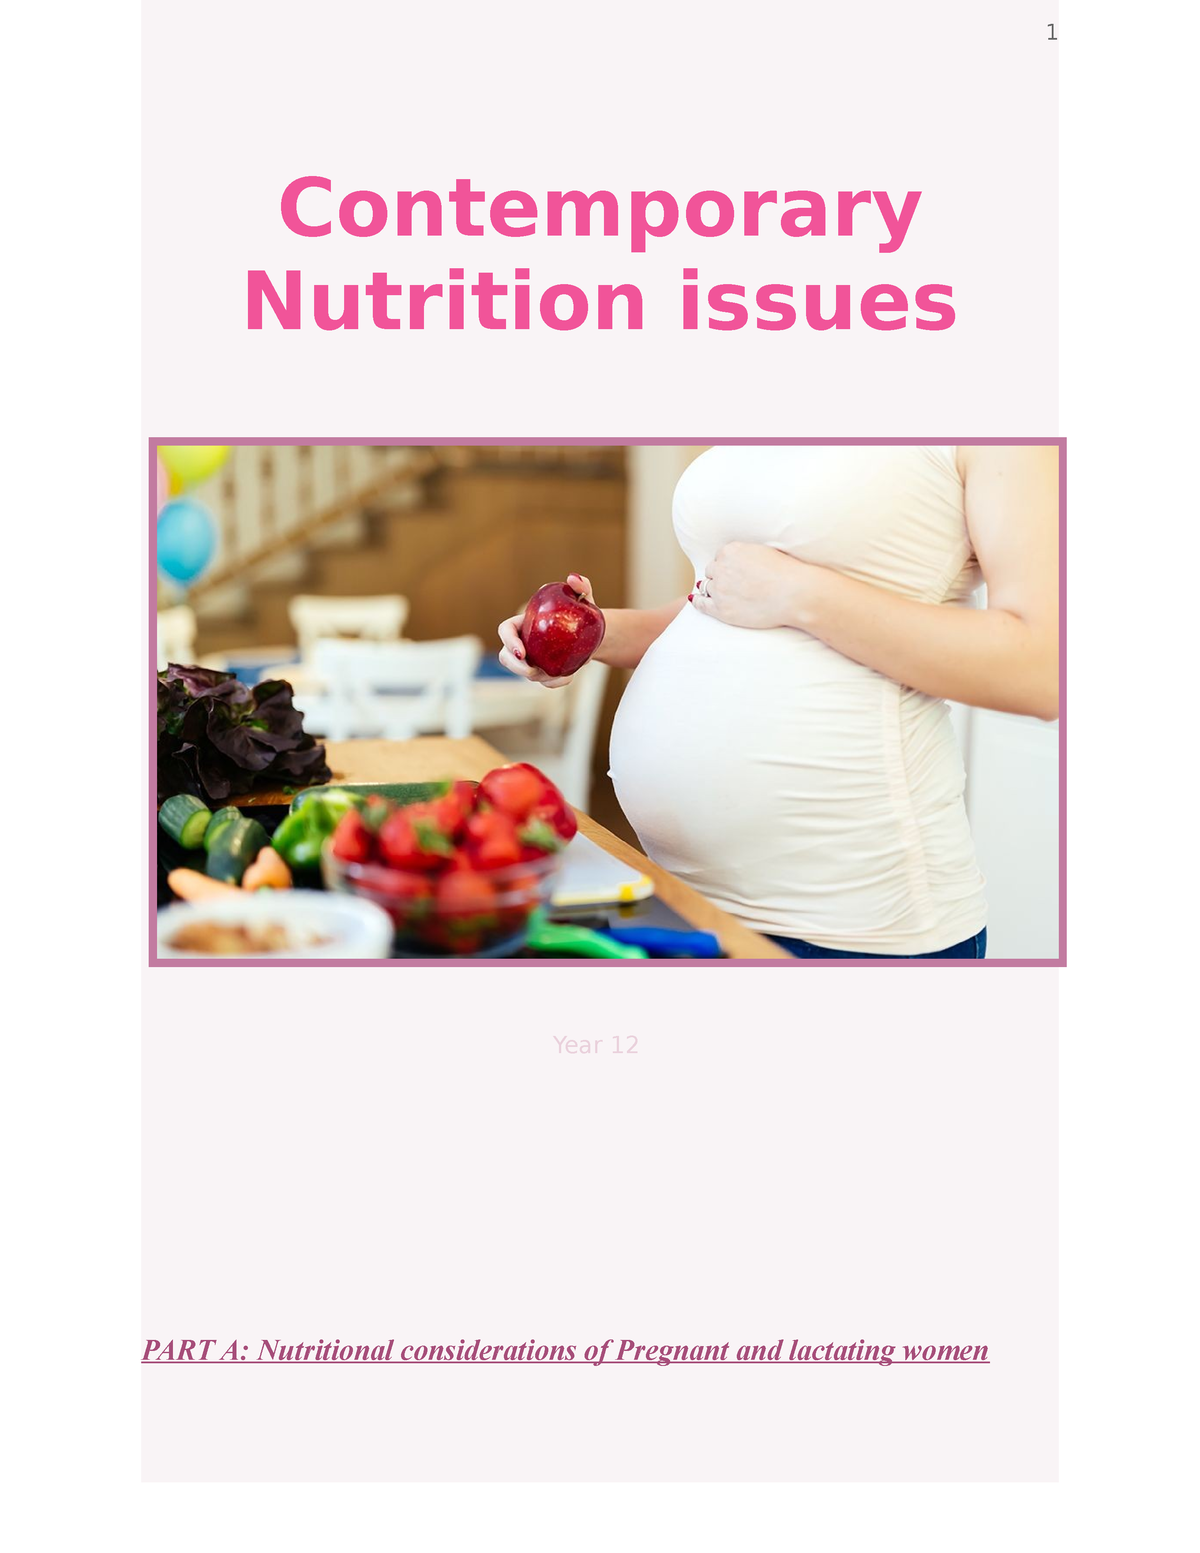 nutrition research articles 2022